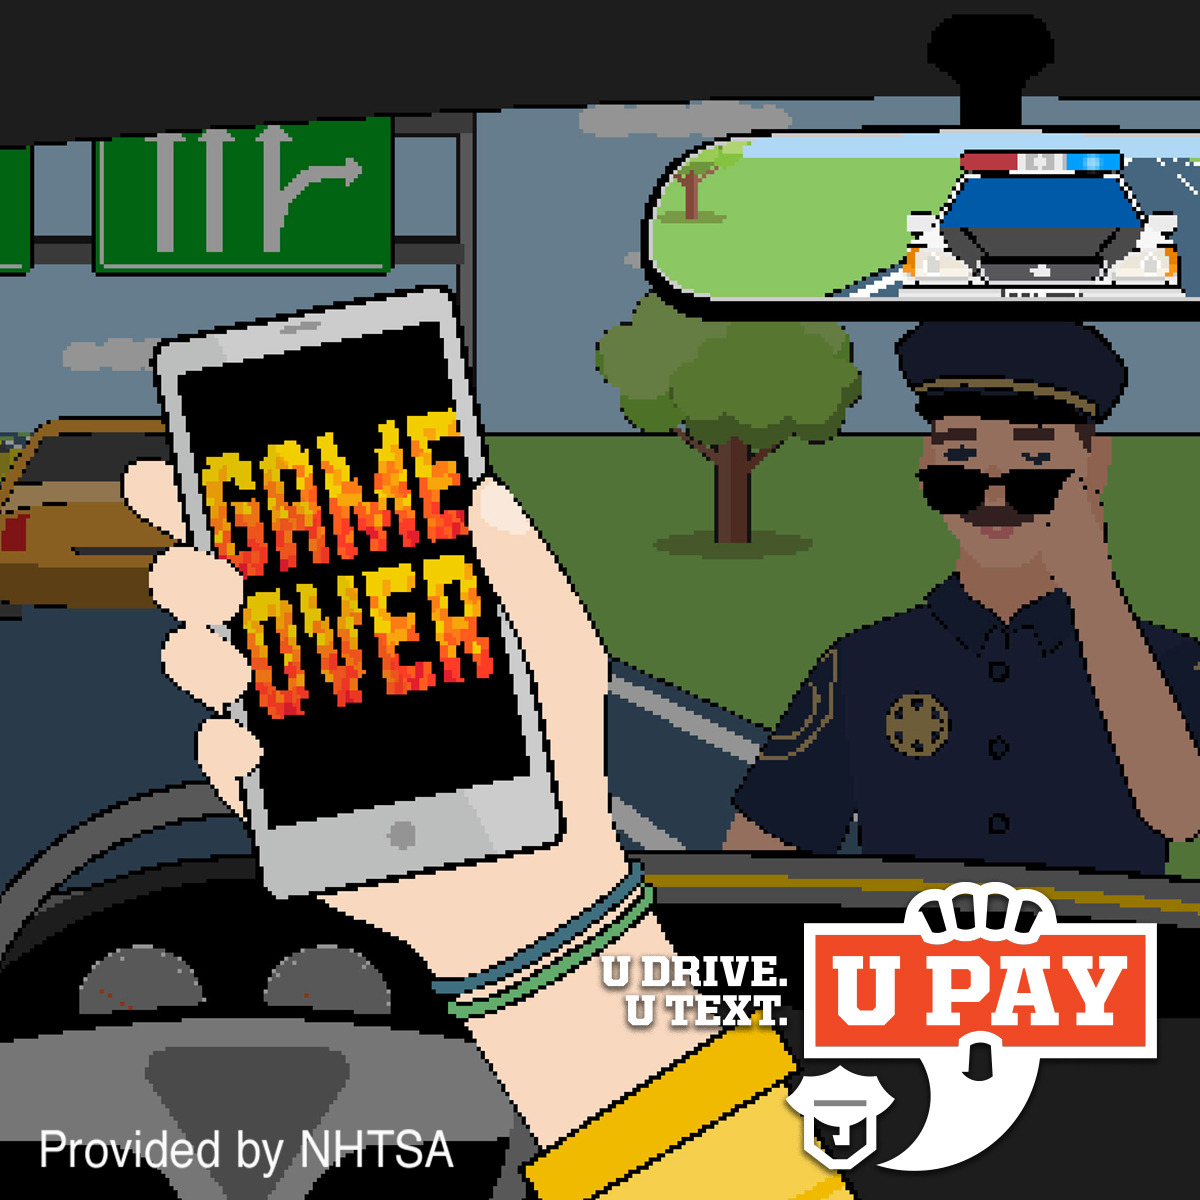 u drive u text ad of cop pulling over distracted driver